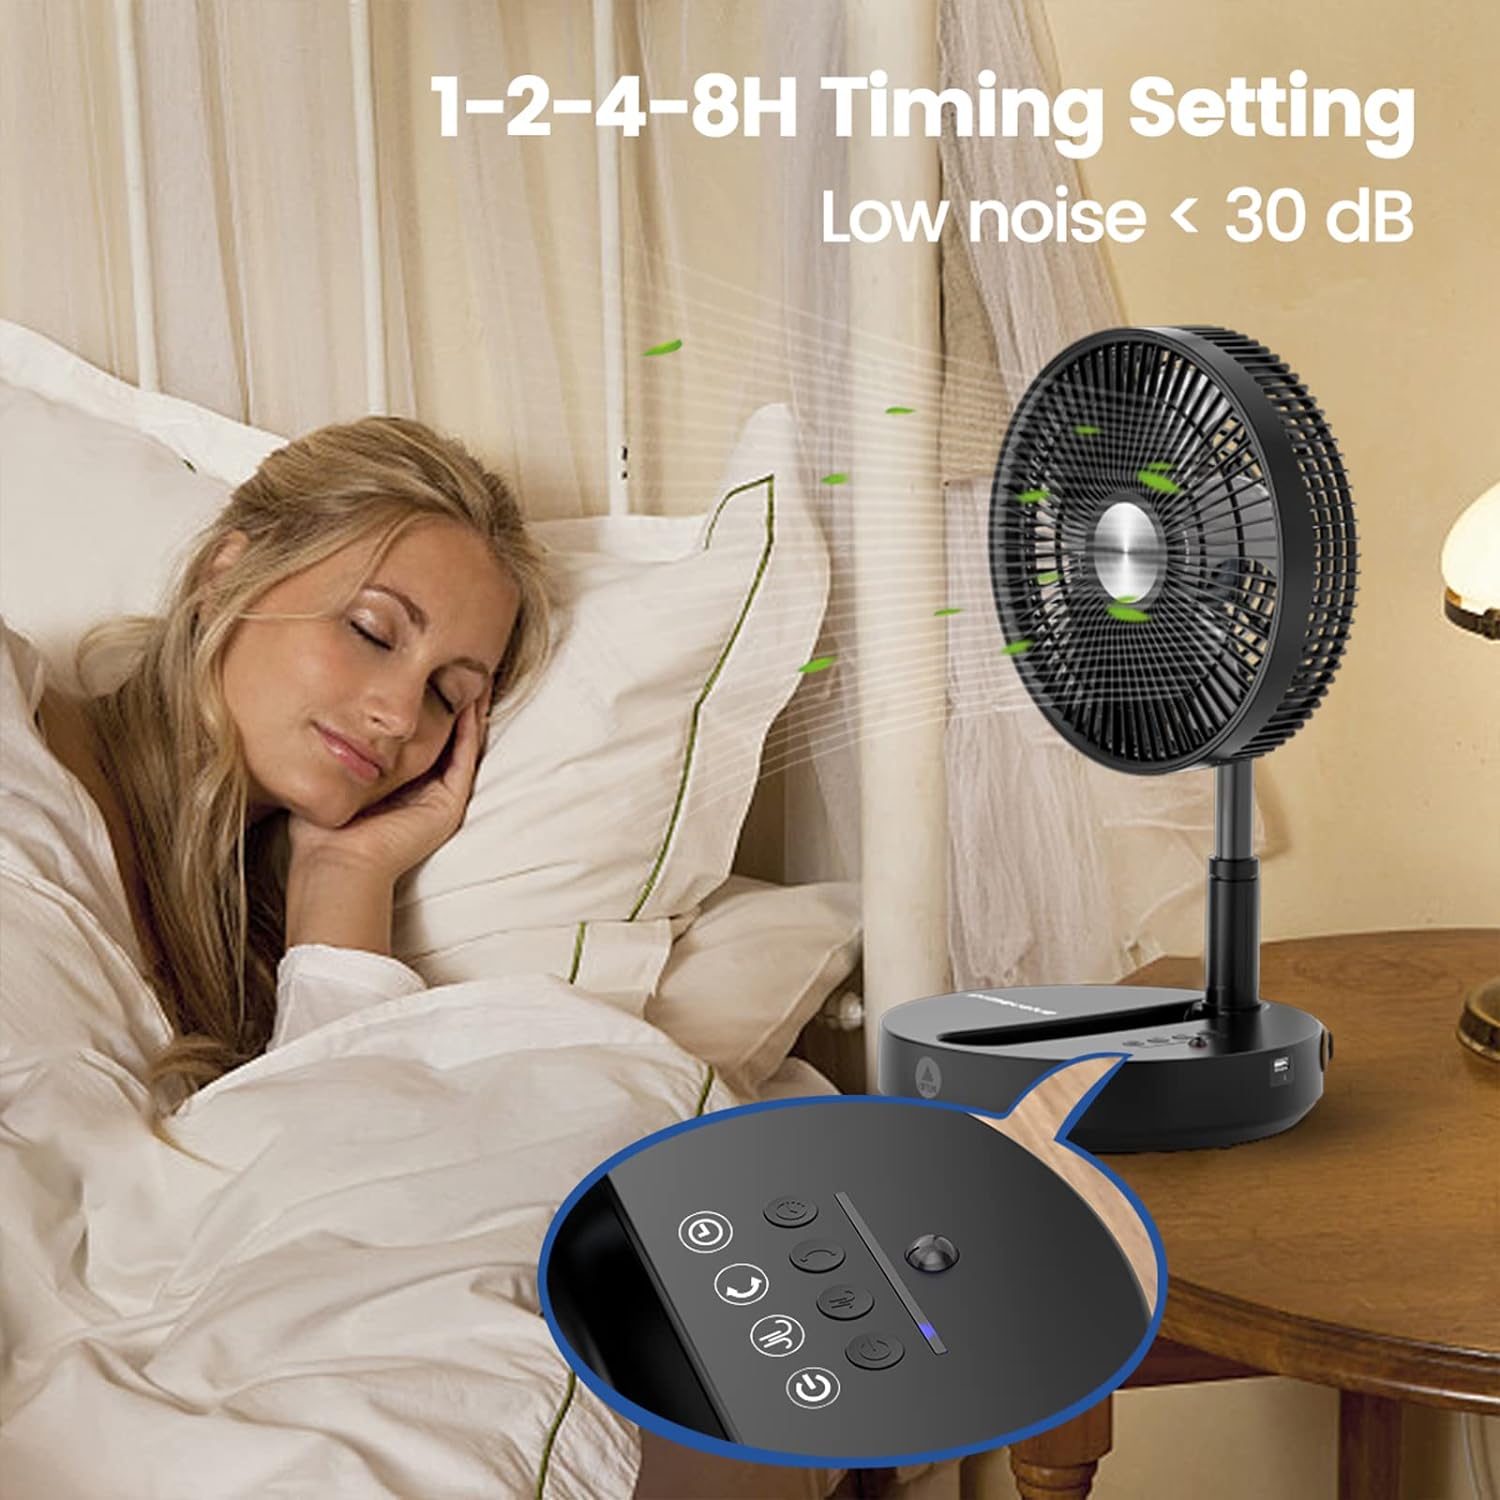 Primevolve 10 inch Oscillating Fan, Battery Operated Fan Adjustable Height, USB Rechargeable- 4 Speeds, 8H Timer Setting for Bedroom Home Office Outdoor Camping Tent Travel